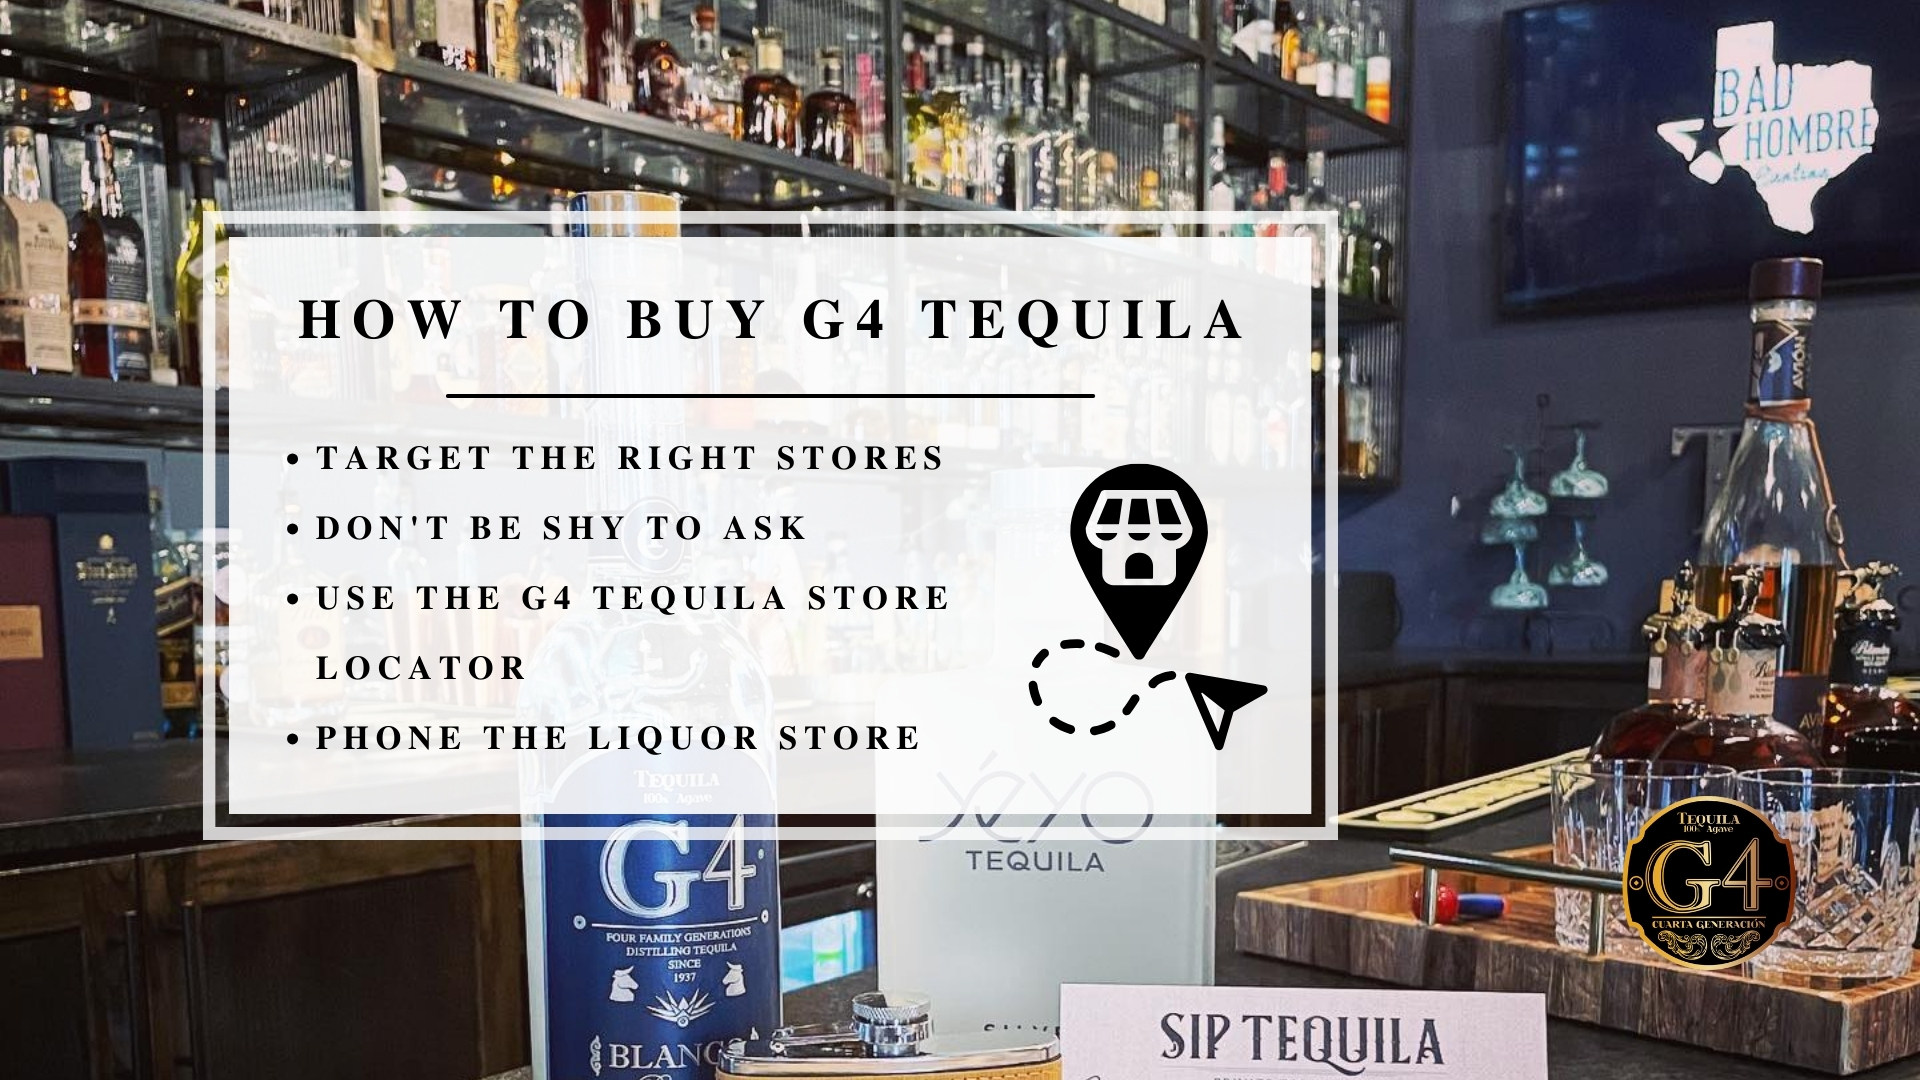 Infographic image of how to buy G4 tequila